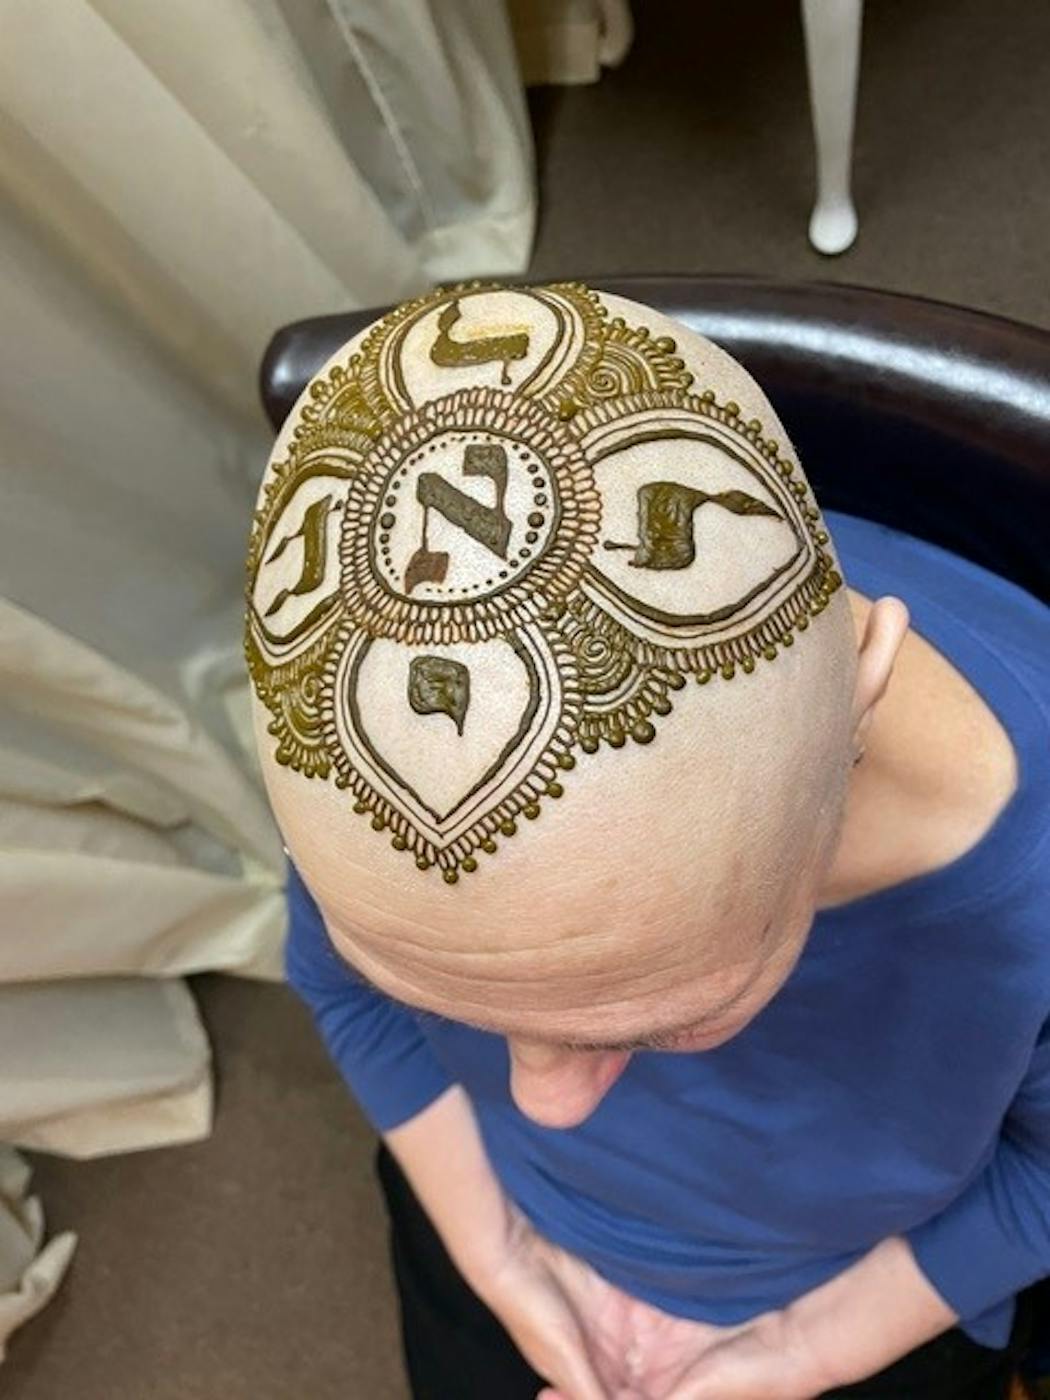 Lora DeVore had Hebrew letters painted on her head by henna artist Victoria Welch.